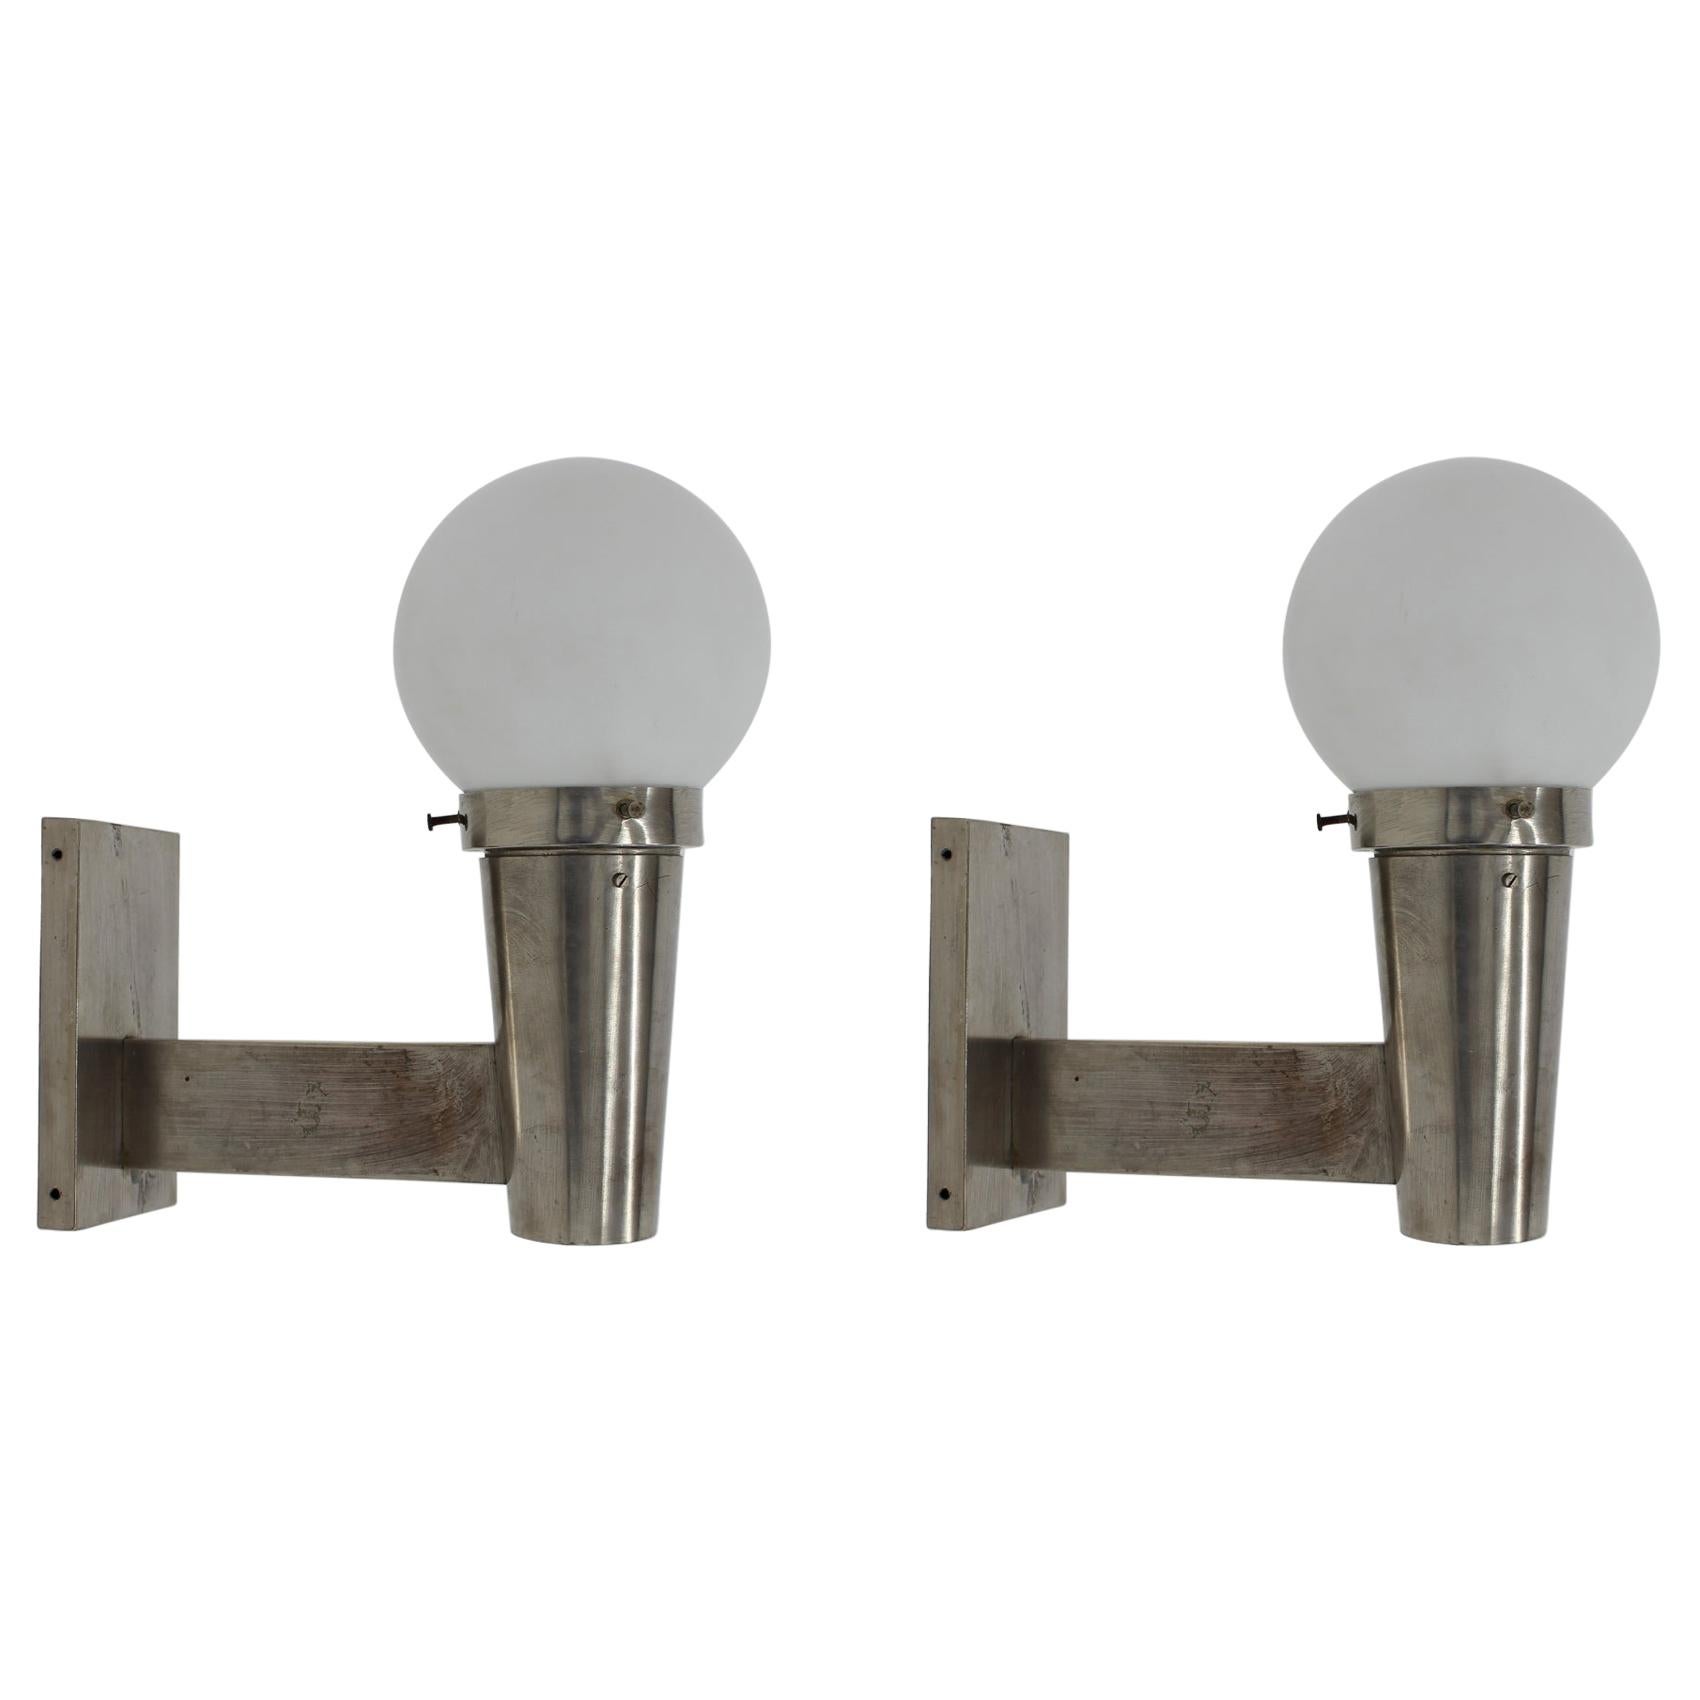 Pair of Bauhaus Chrome Wall Lamps/Scones, 1930s For Sale